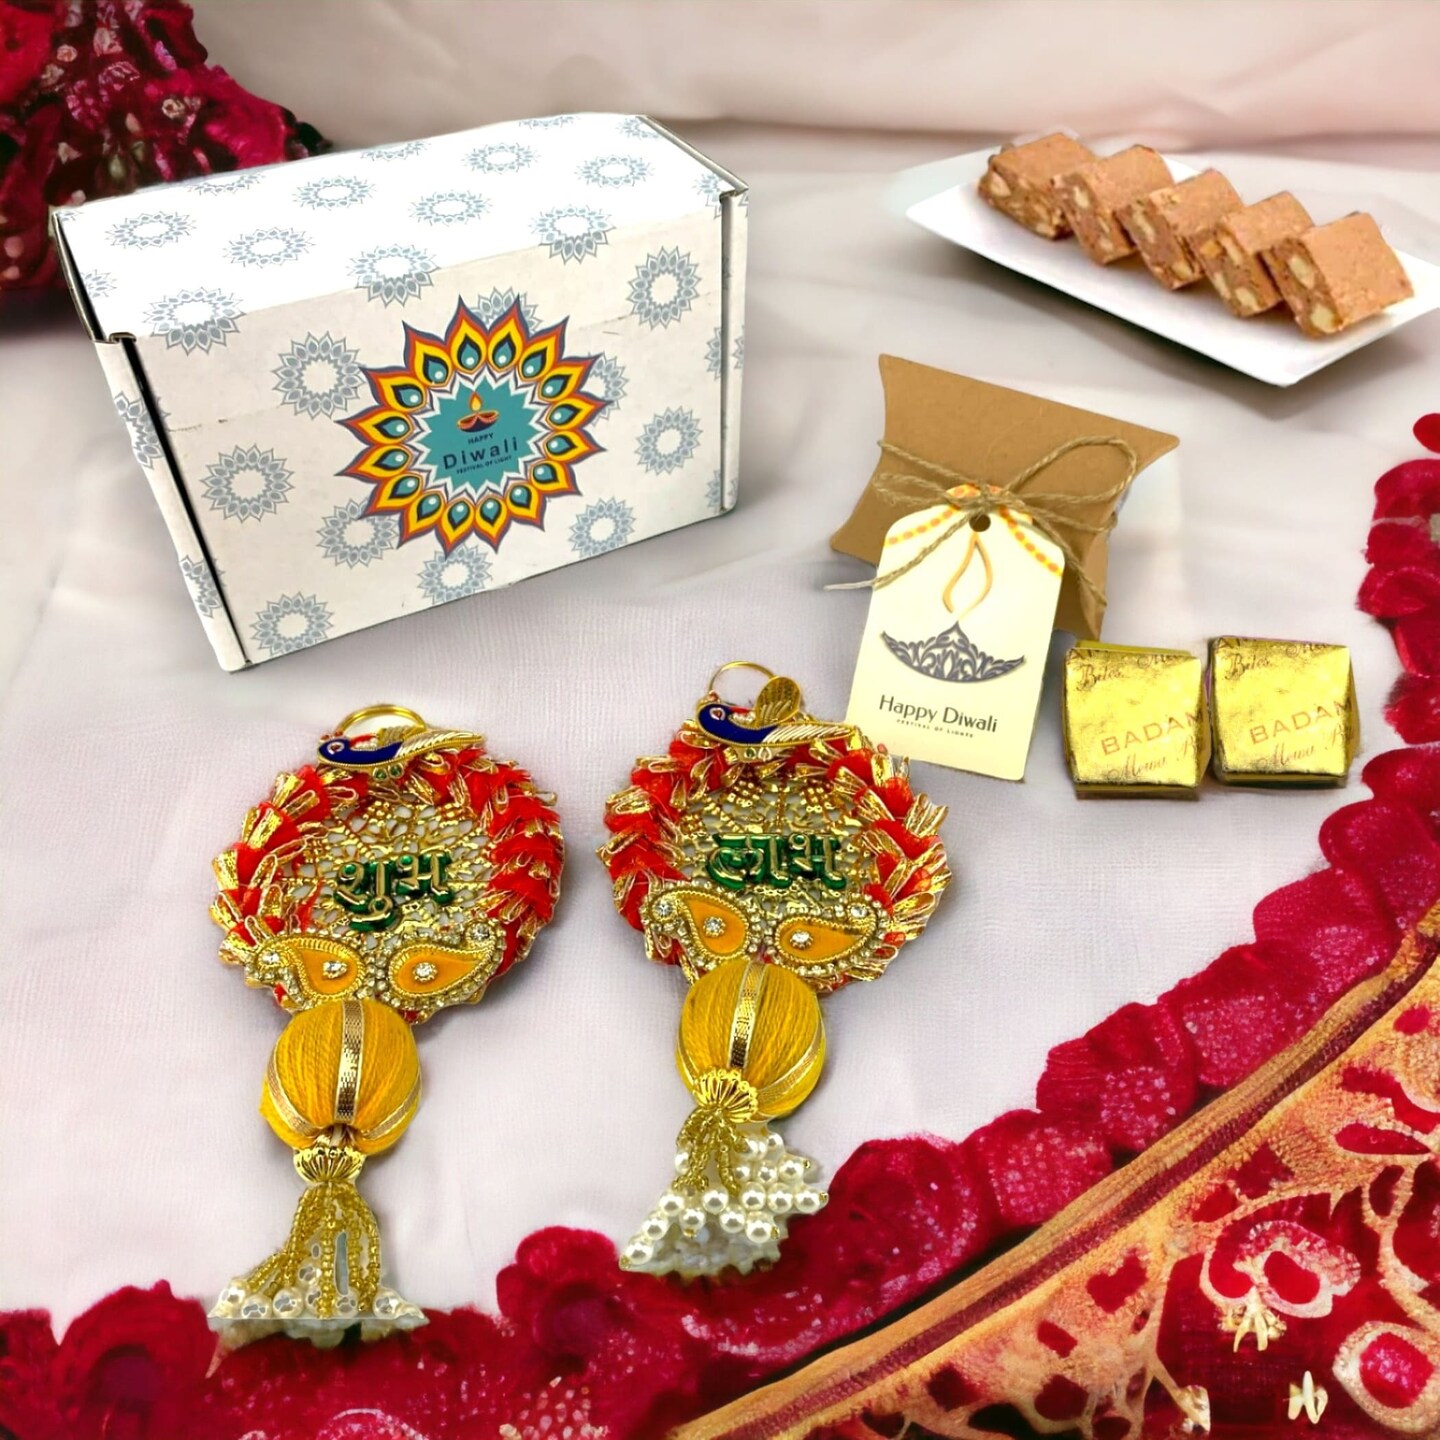 5 Best Navratri Gifts for Your Loved Ones #shorts #navratri #gift - YouTube